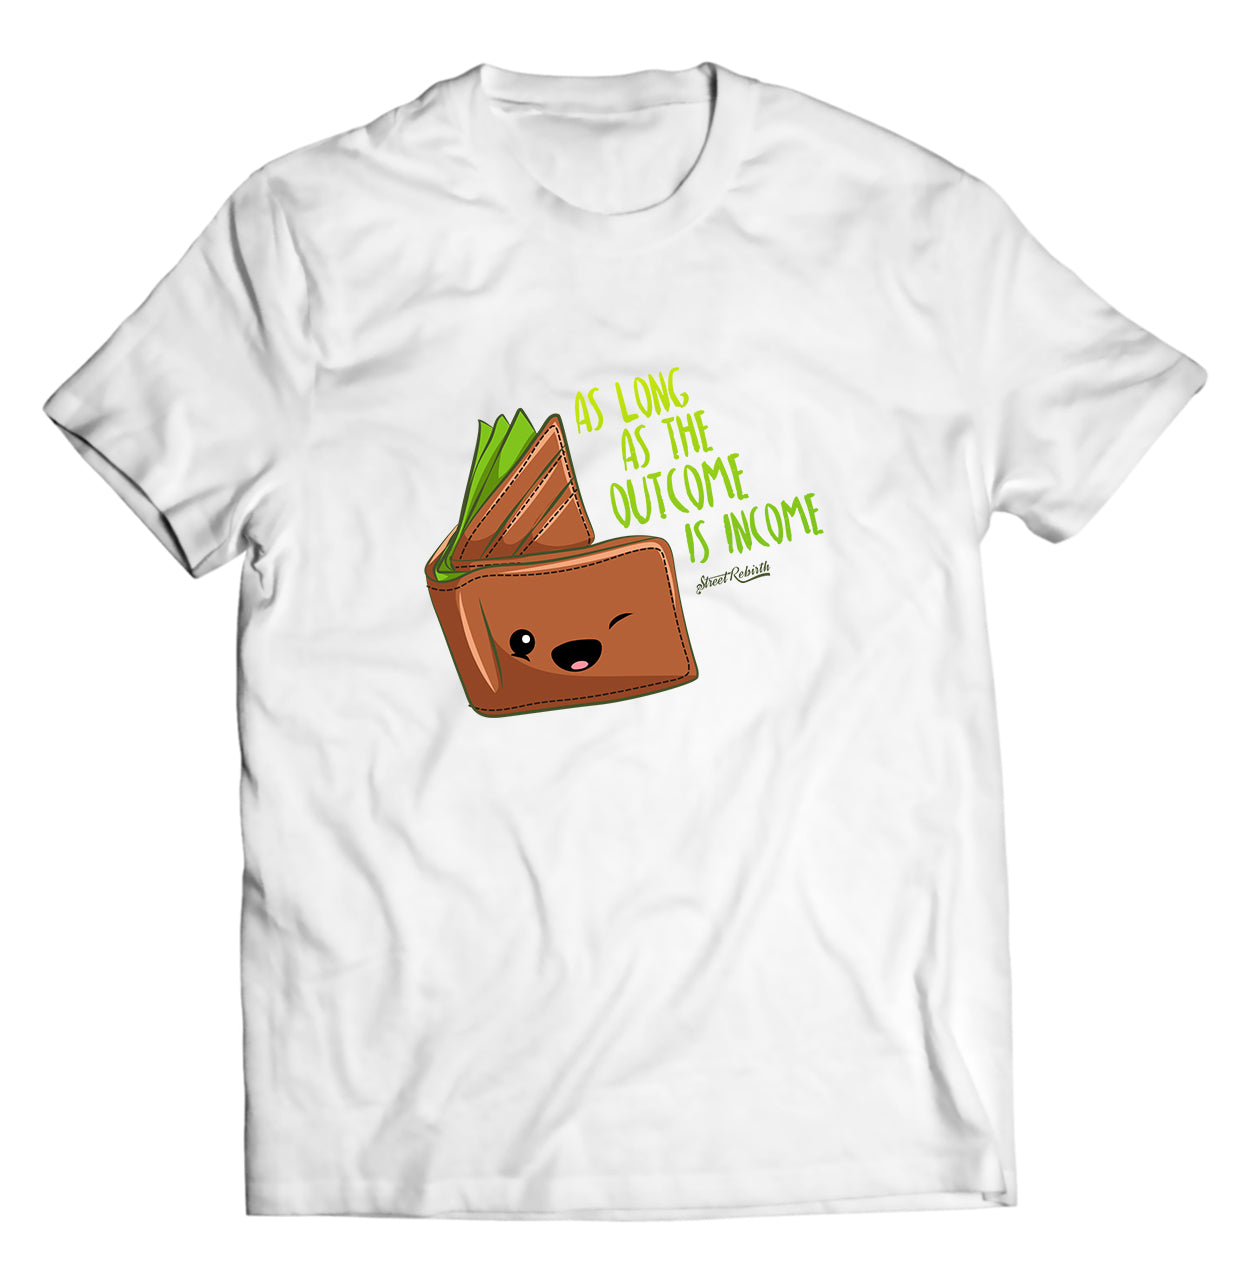 As Long As The Outcome Is Income PUN SHIRT - DIRECT TO GARMENT QUALITY PRINT - UNISEX SHIRT